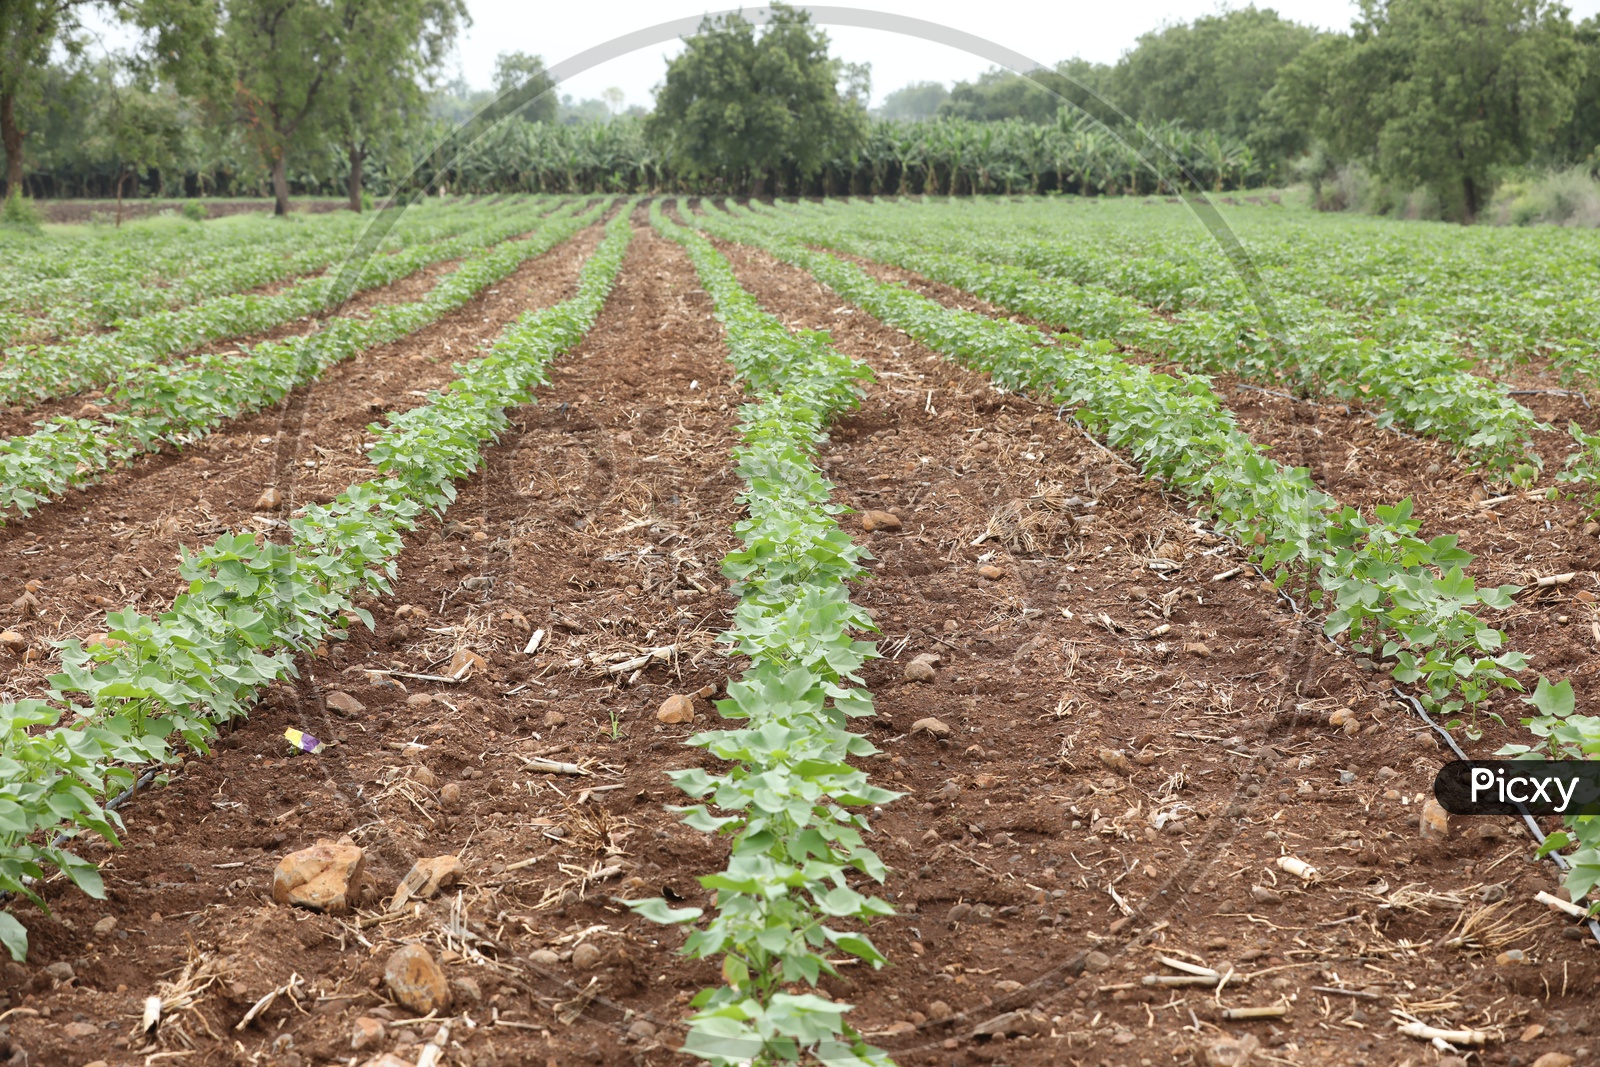 Cotton Crop Field / Cotton Plants in a Neat Rows Presentation